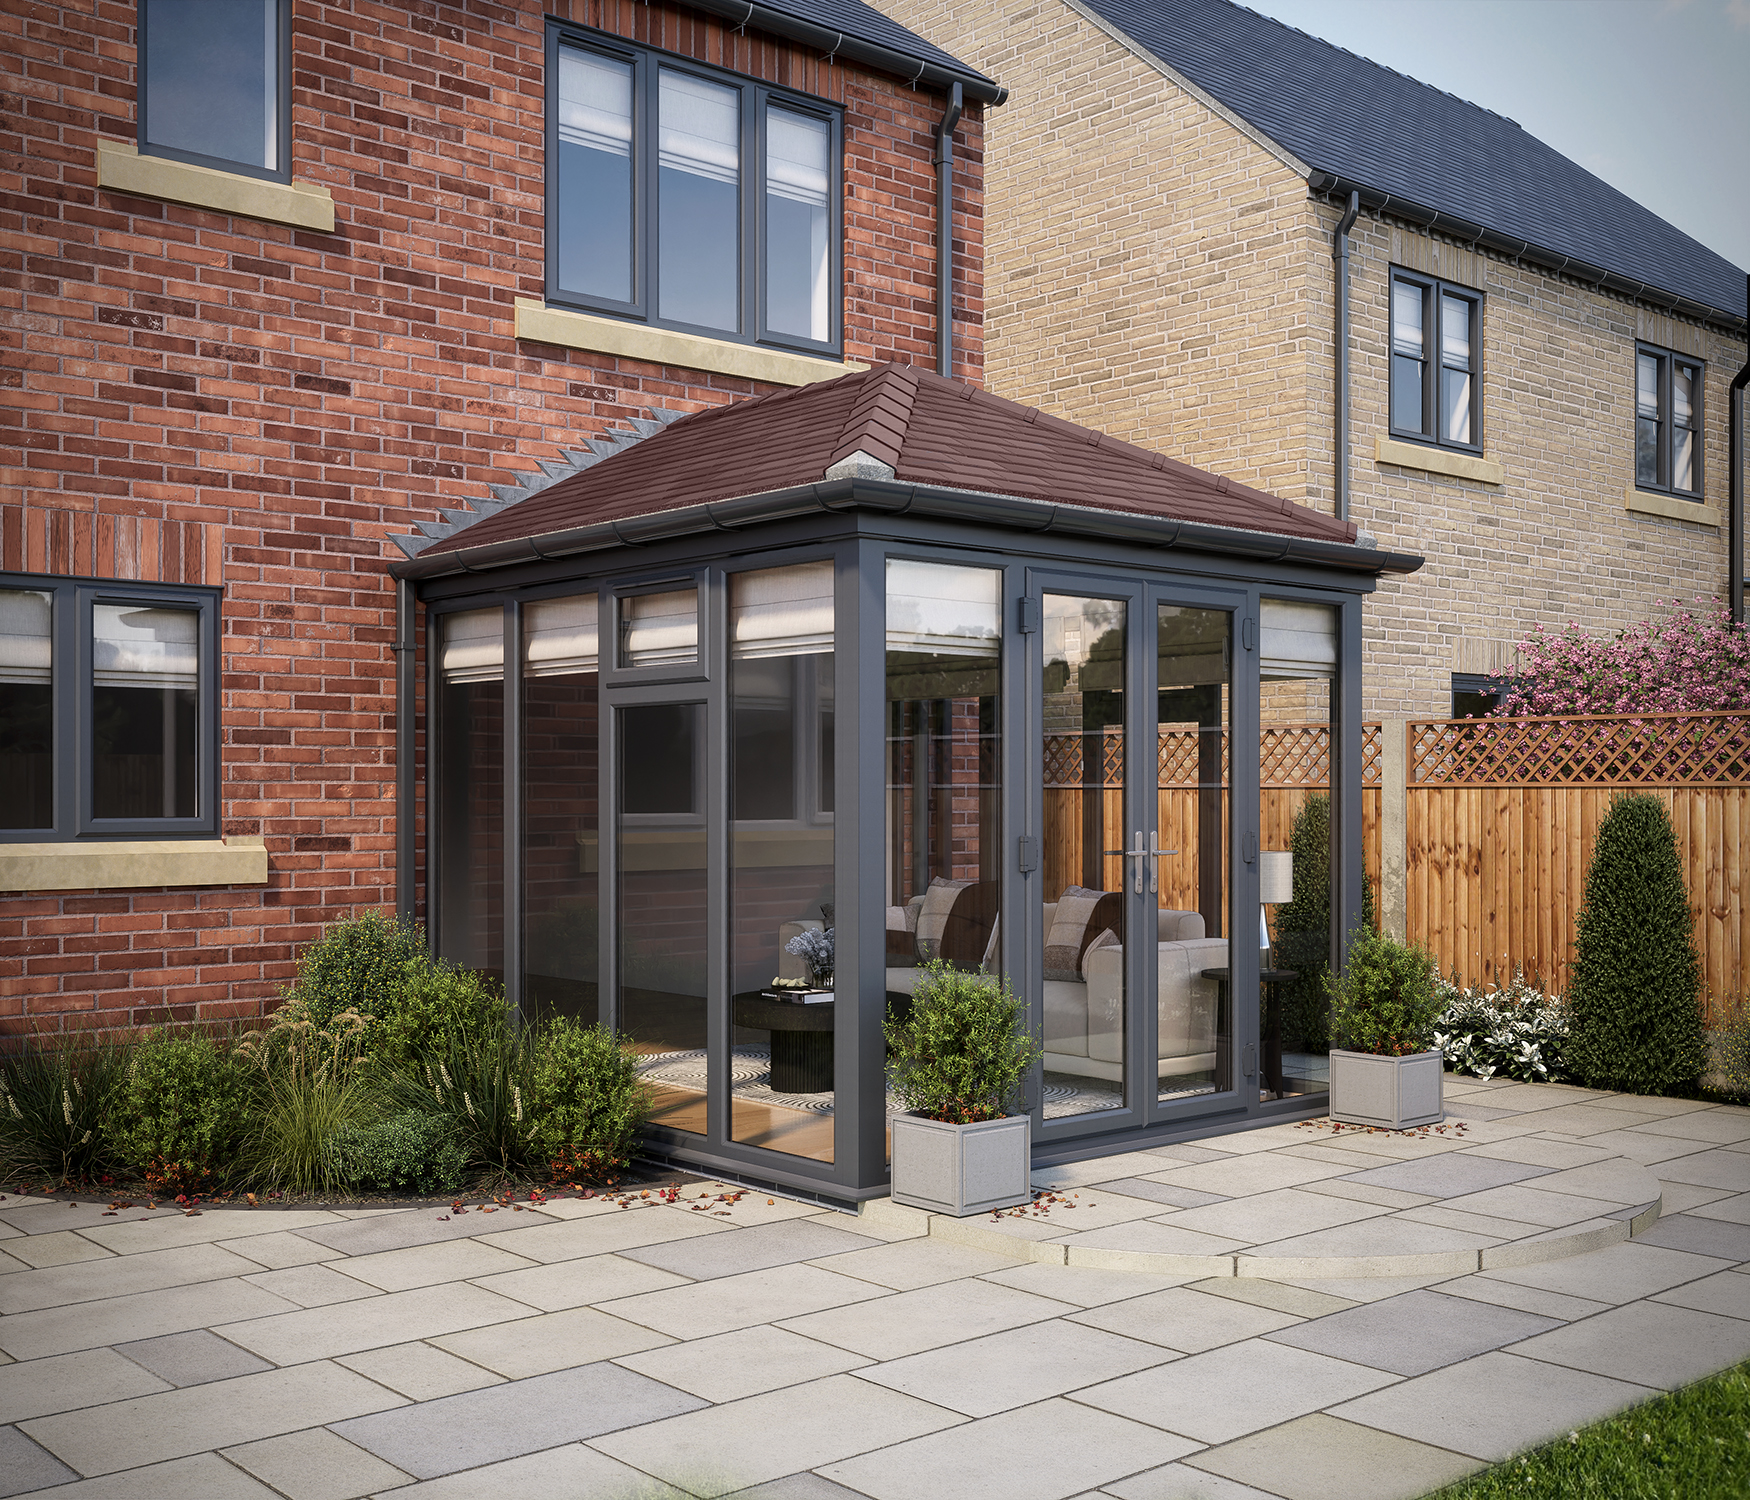 SOLid Roof Full Height Edwardian Conservatory Grey Frames with Rustic Brown Tiles - 13 x 10ft